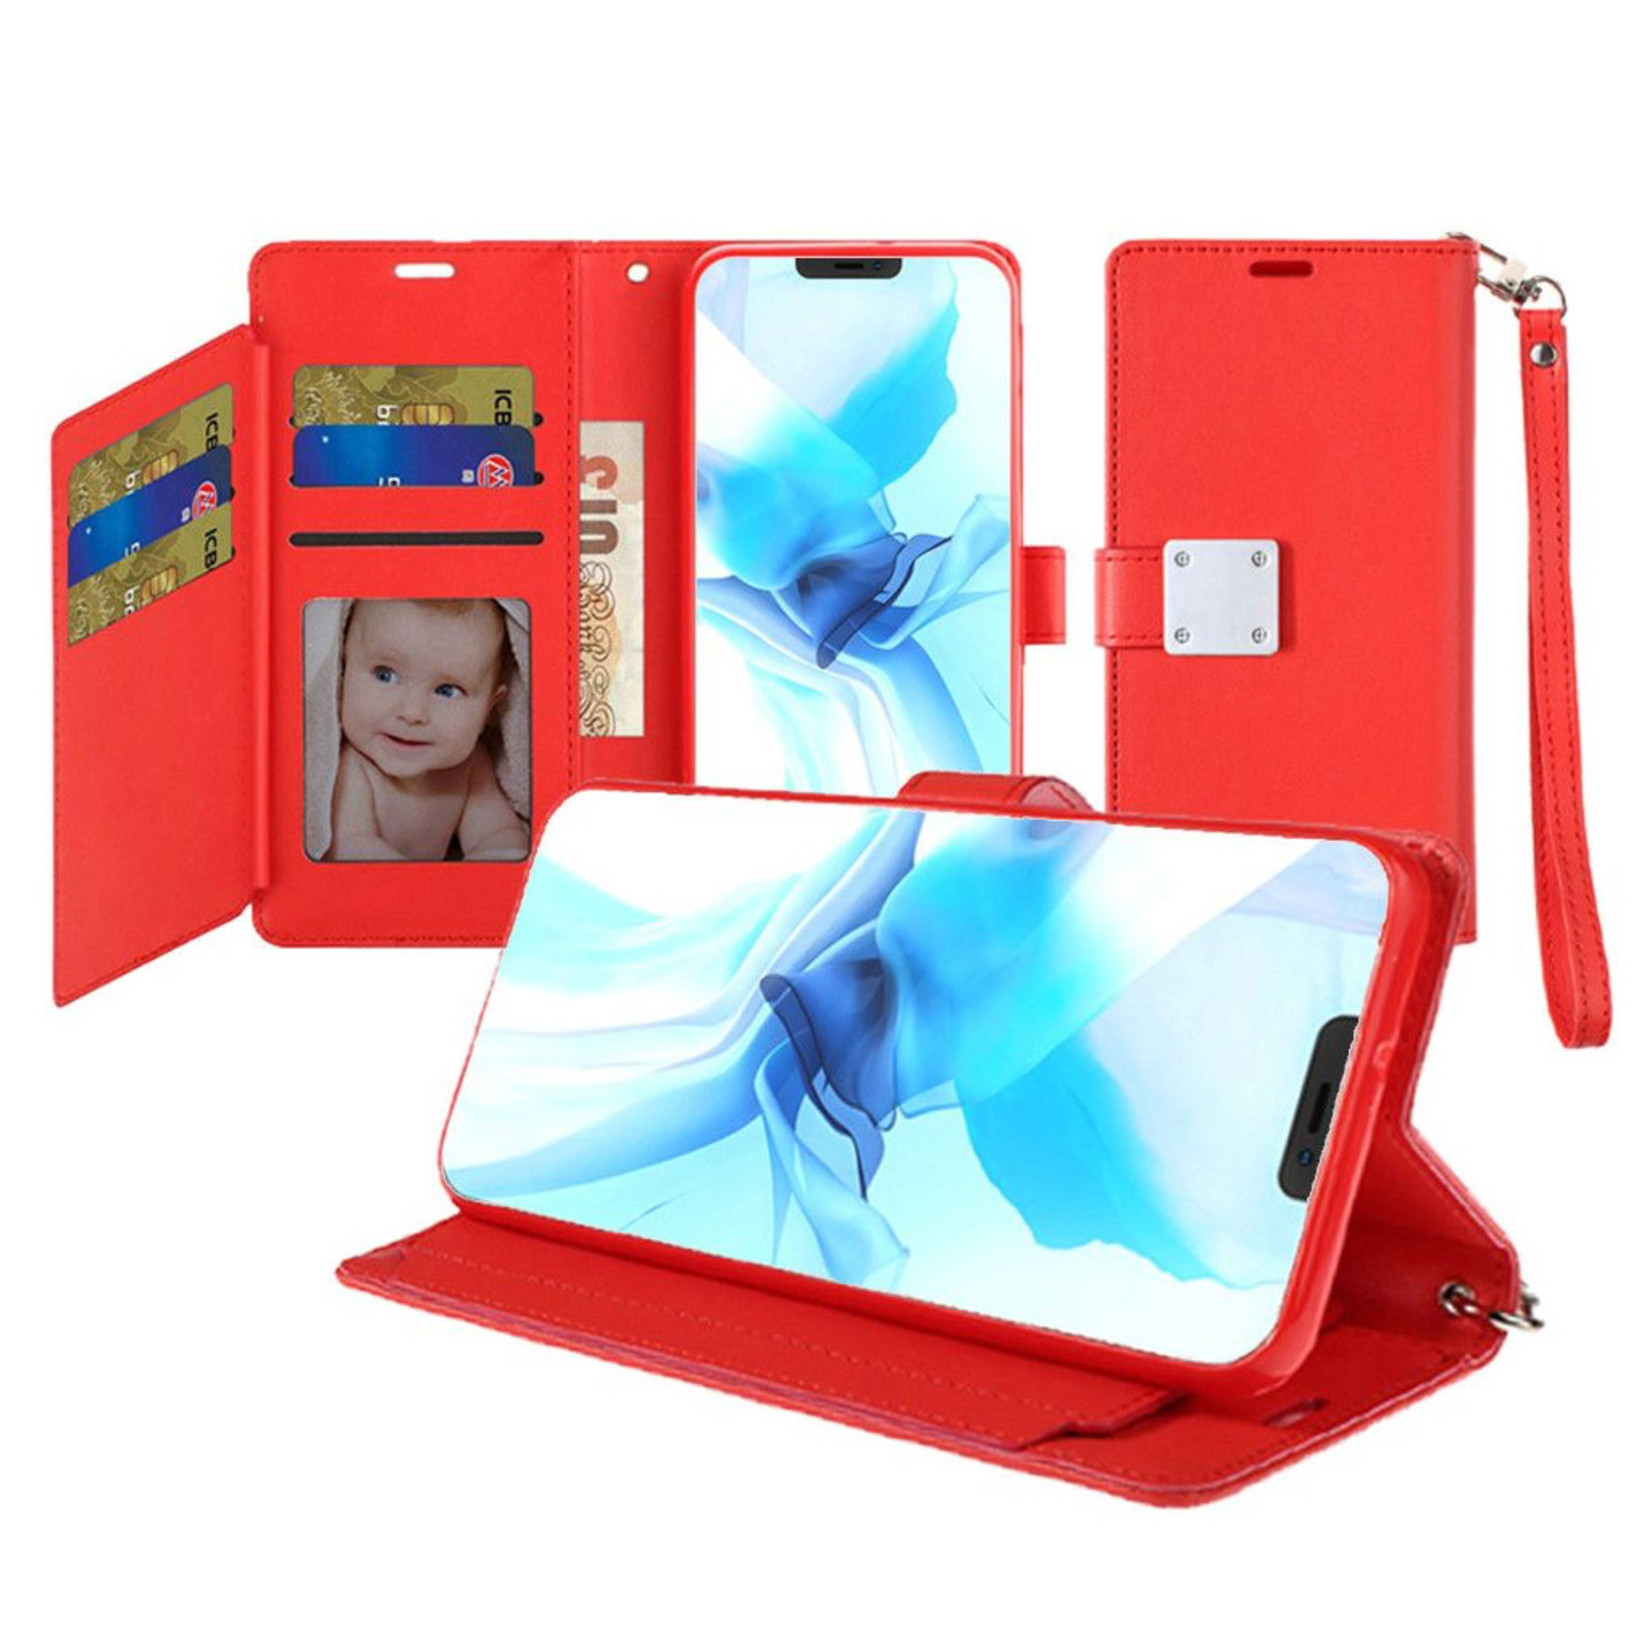 Hybrid PU Leather Metallic Flip Cover Wallet Case with Credit Card Slots for iPhone 13 Pro